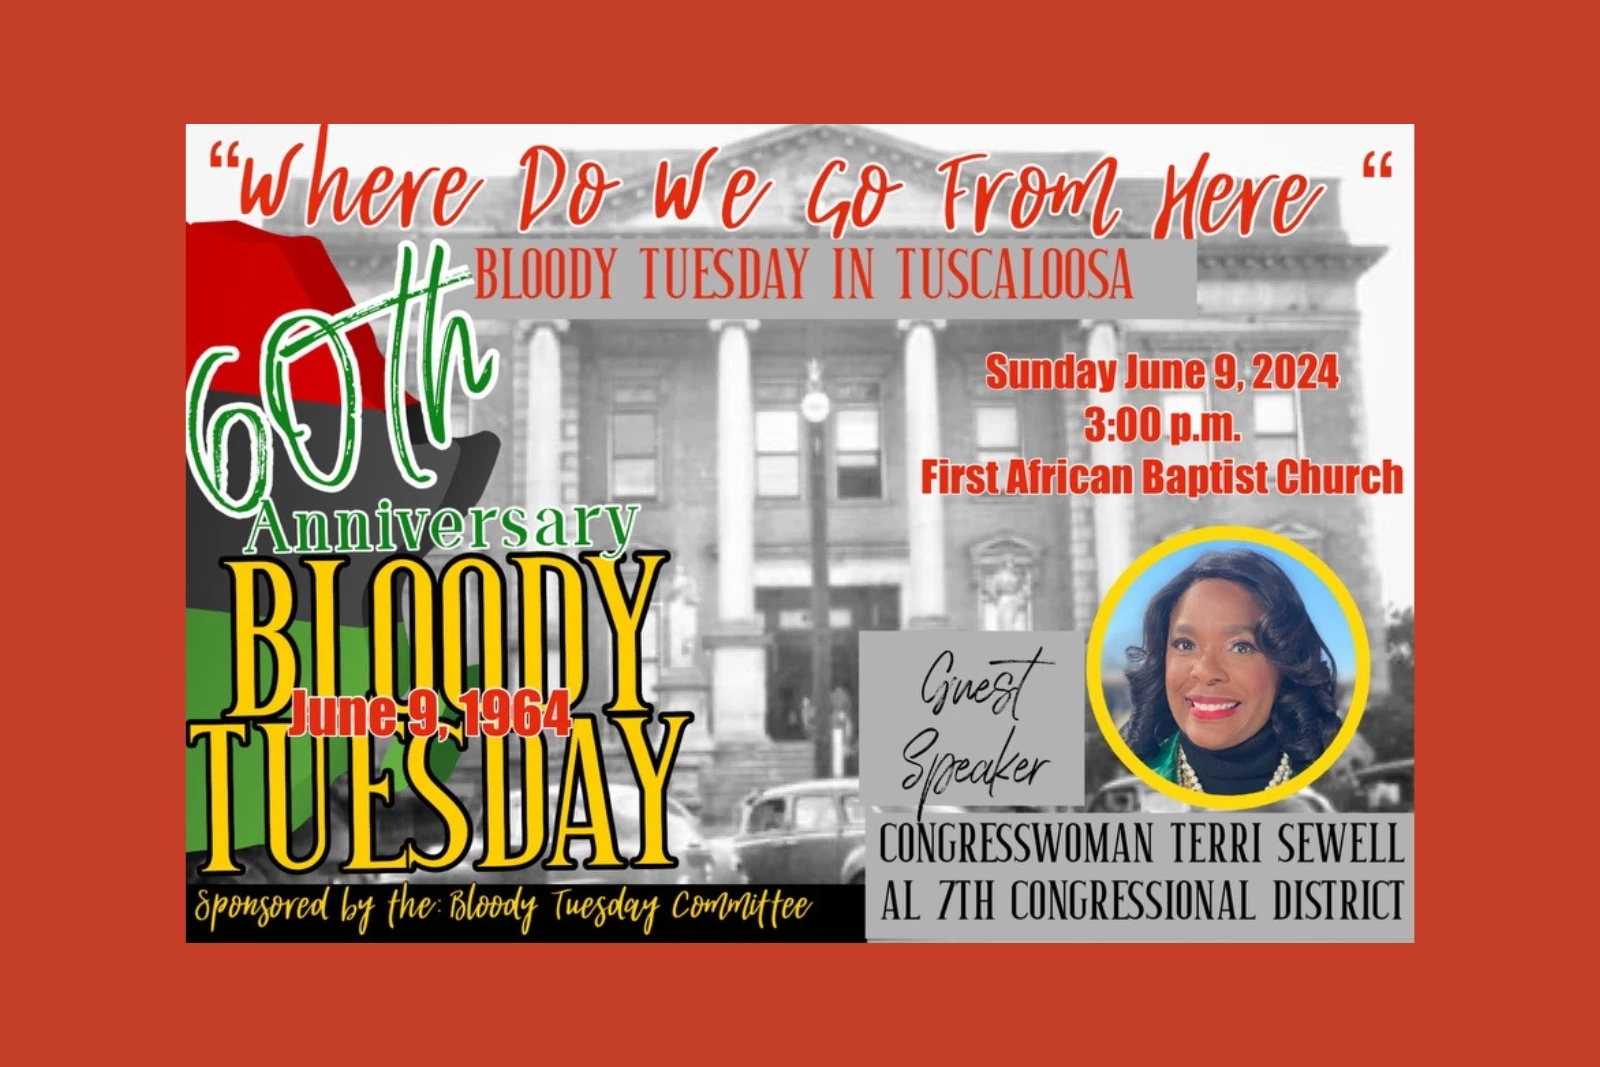 60th Anniversary Event to Commemorate Tuscaloosa's Bloody Tuesday